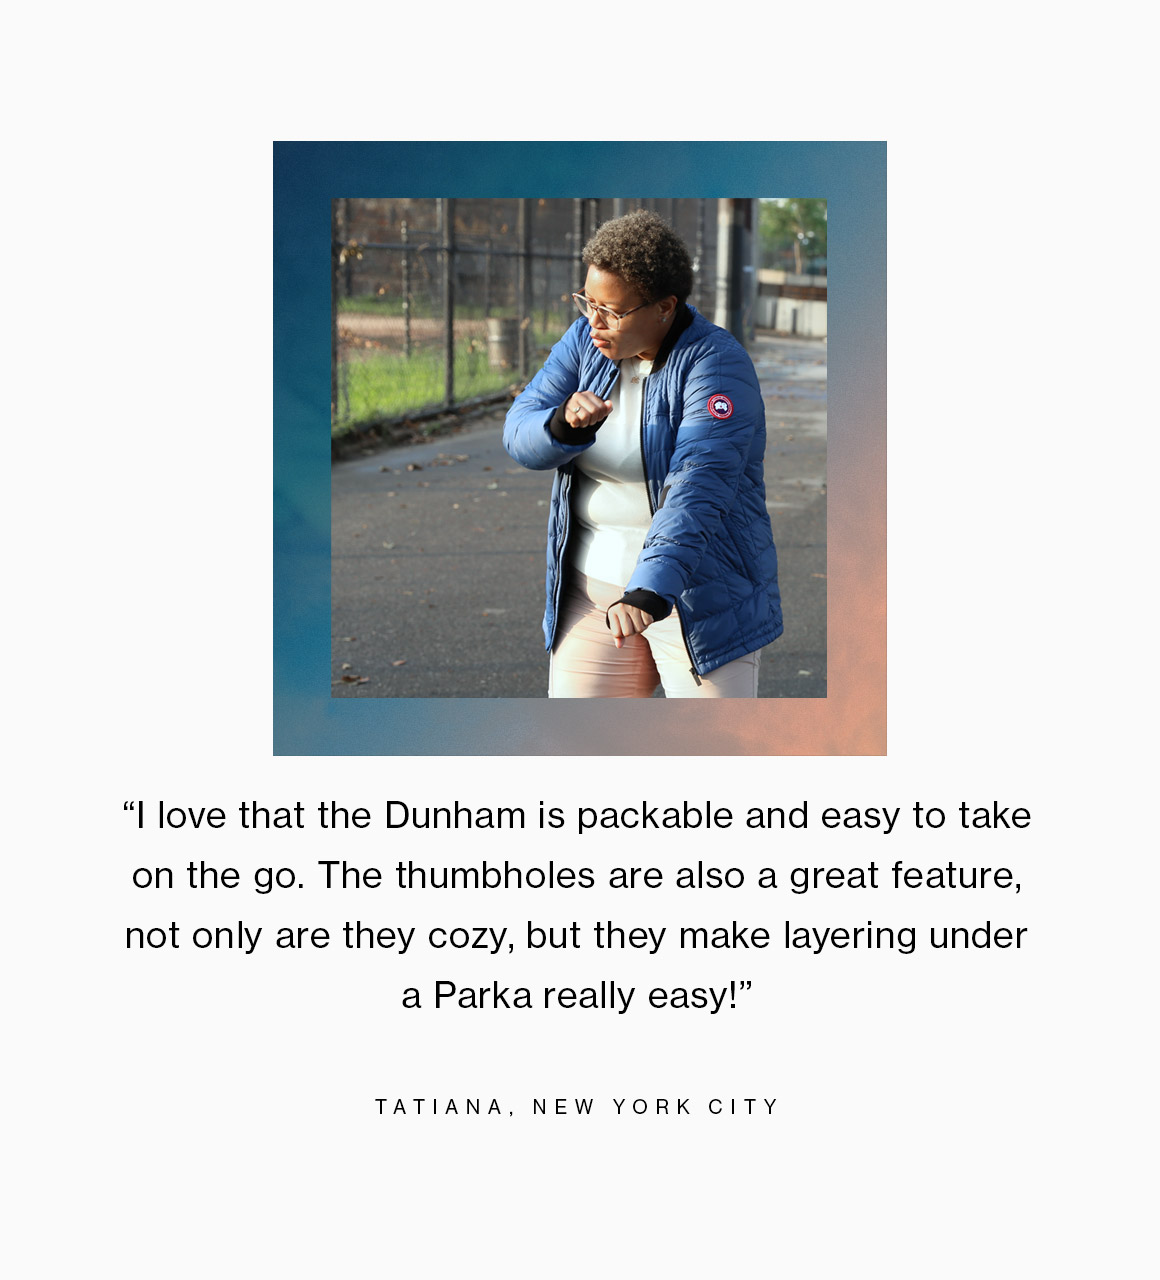 I love that the Dunham is packable and easy to take on the go. The thumbholes are also a great feature, not only are they cozy, but they make layering under a Parka really easy.